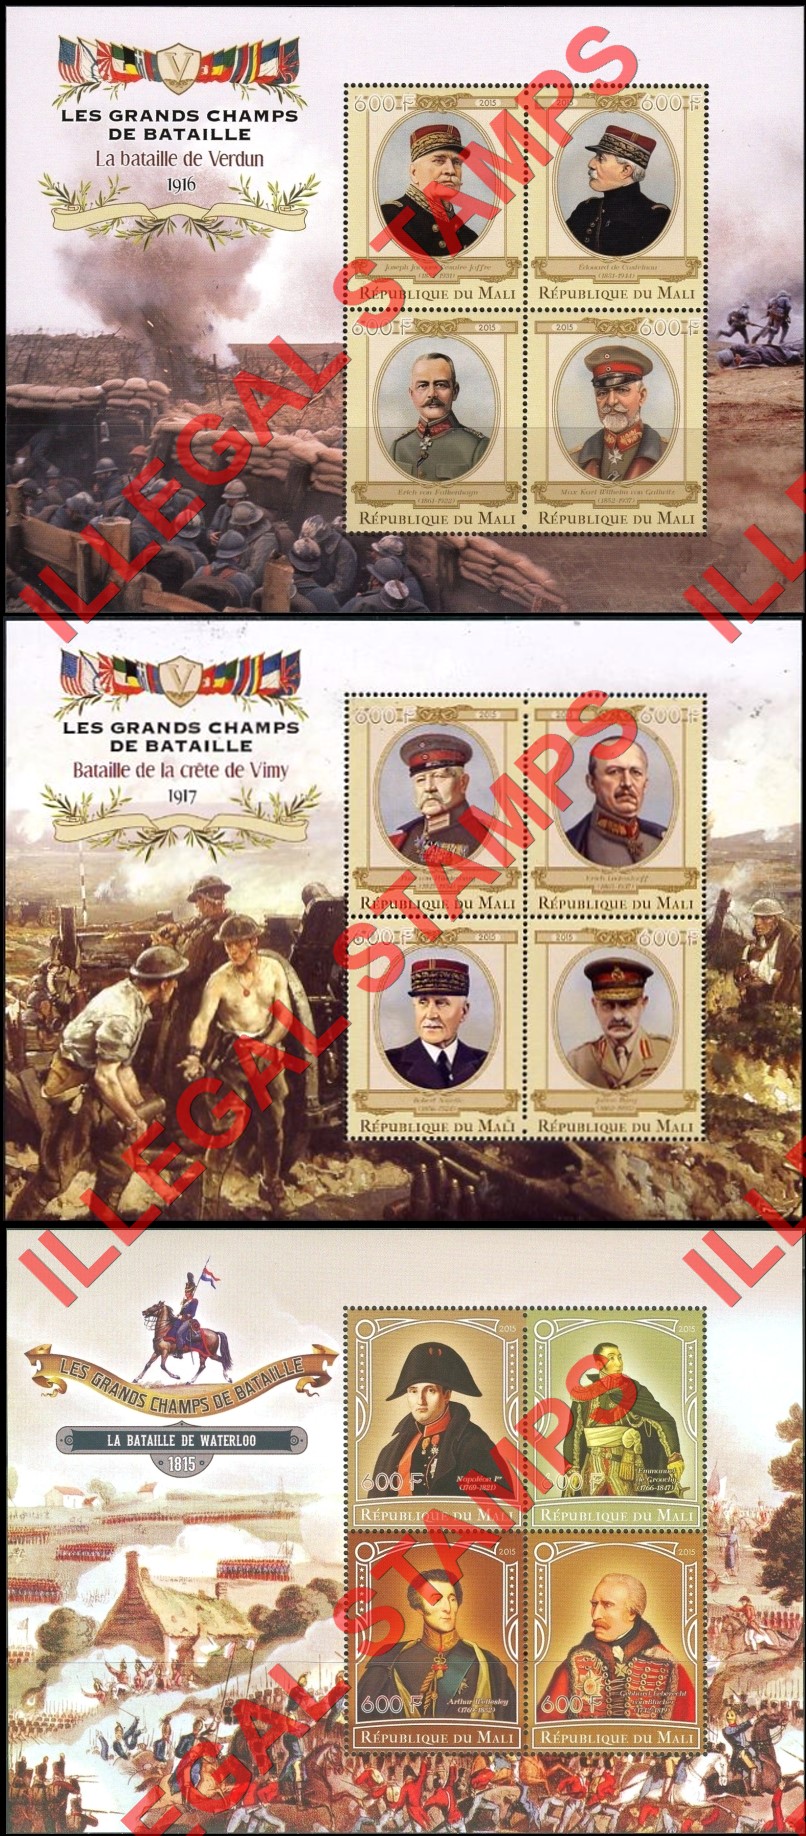 Mali 2015 Military Leaders and Battles Illegal Stamp Souvenir Sheets of 4 (Part 4)